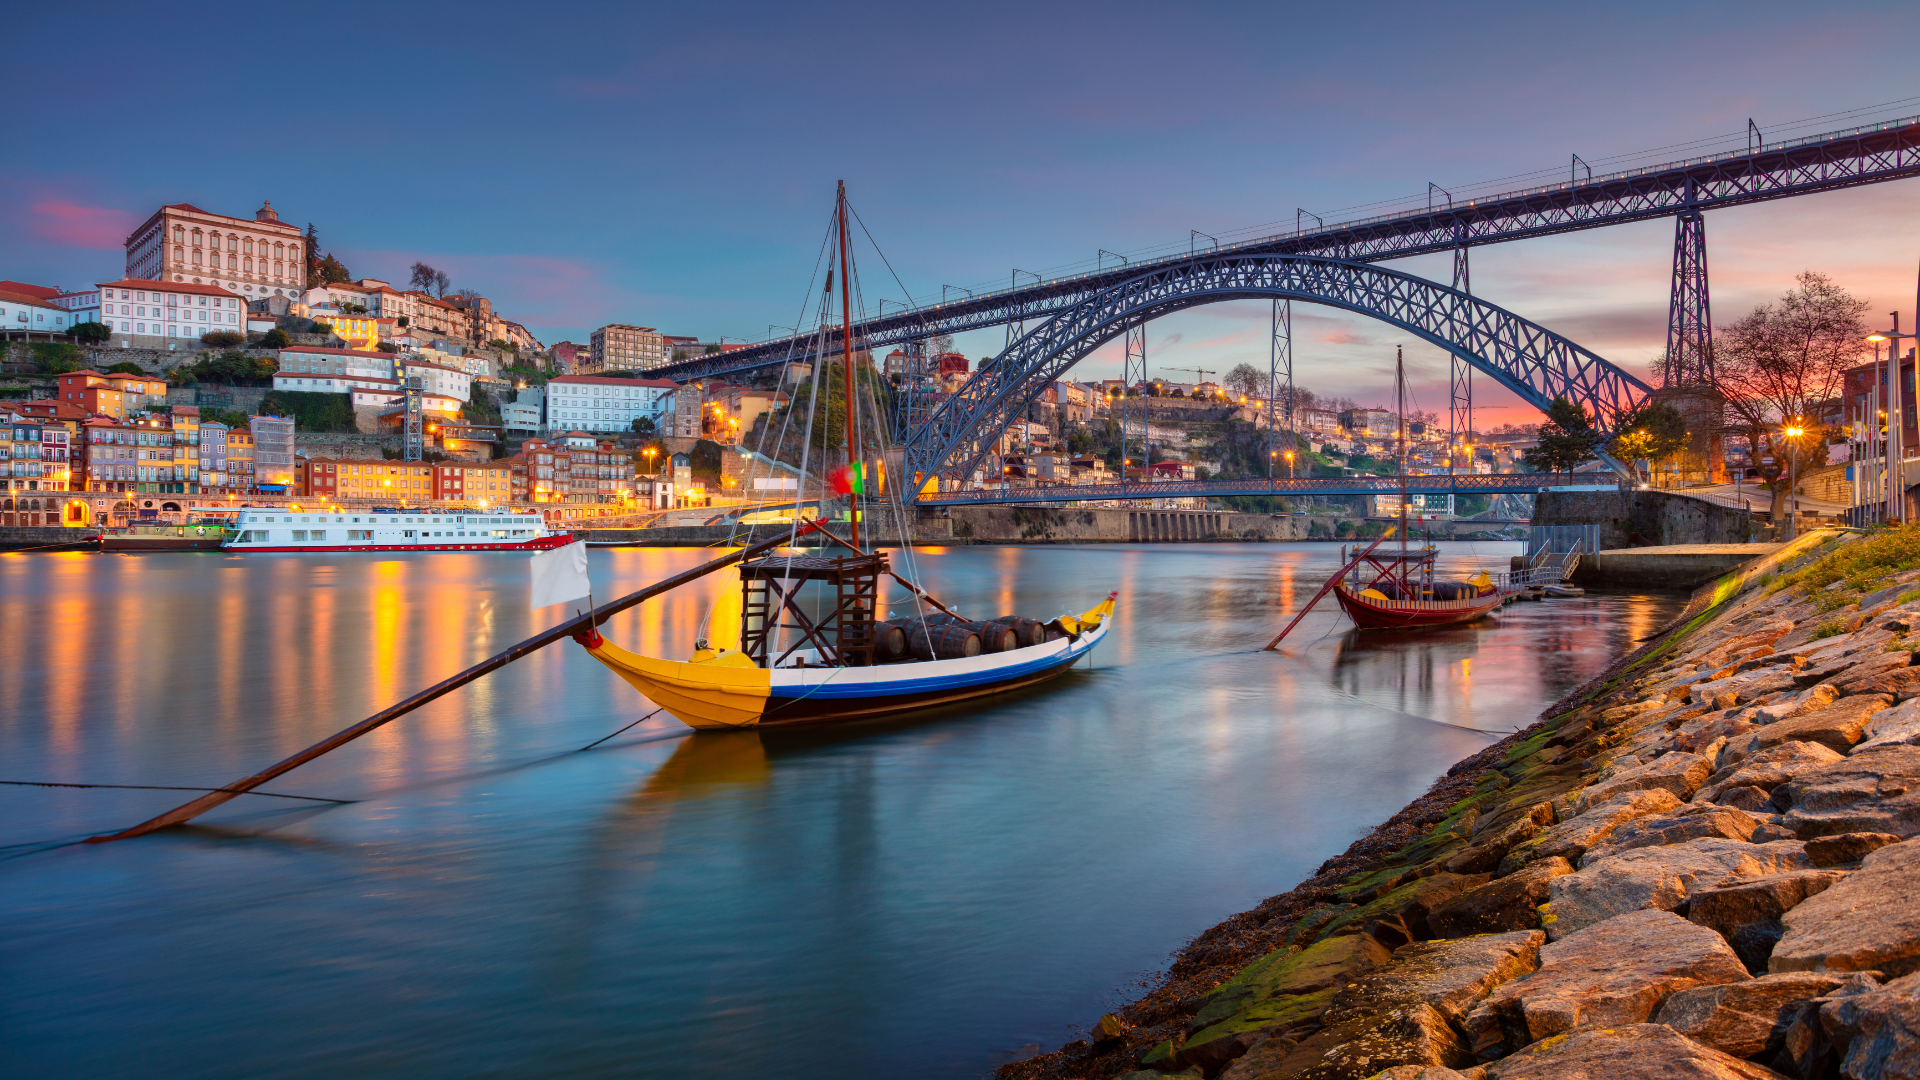 Porto Portugal is one of the best European cities to explore on foot